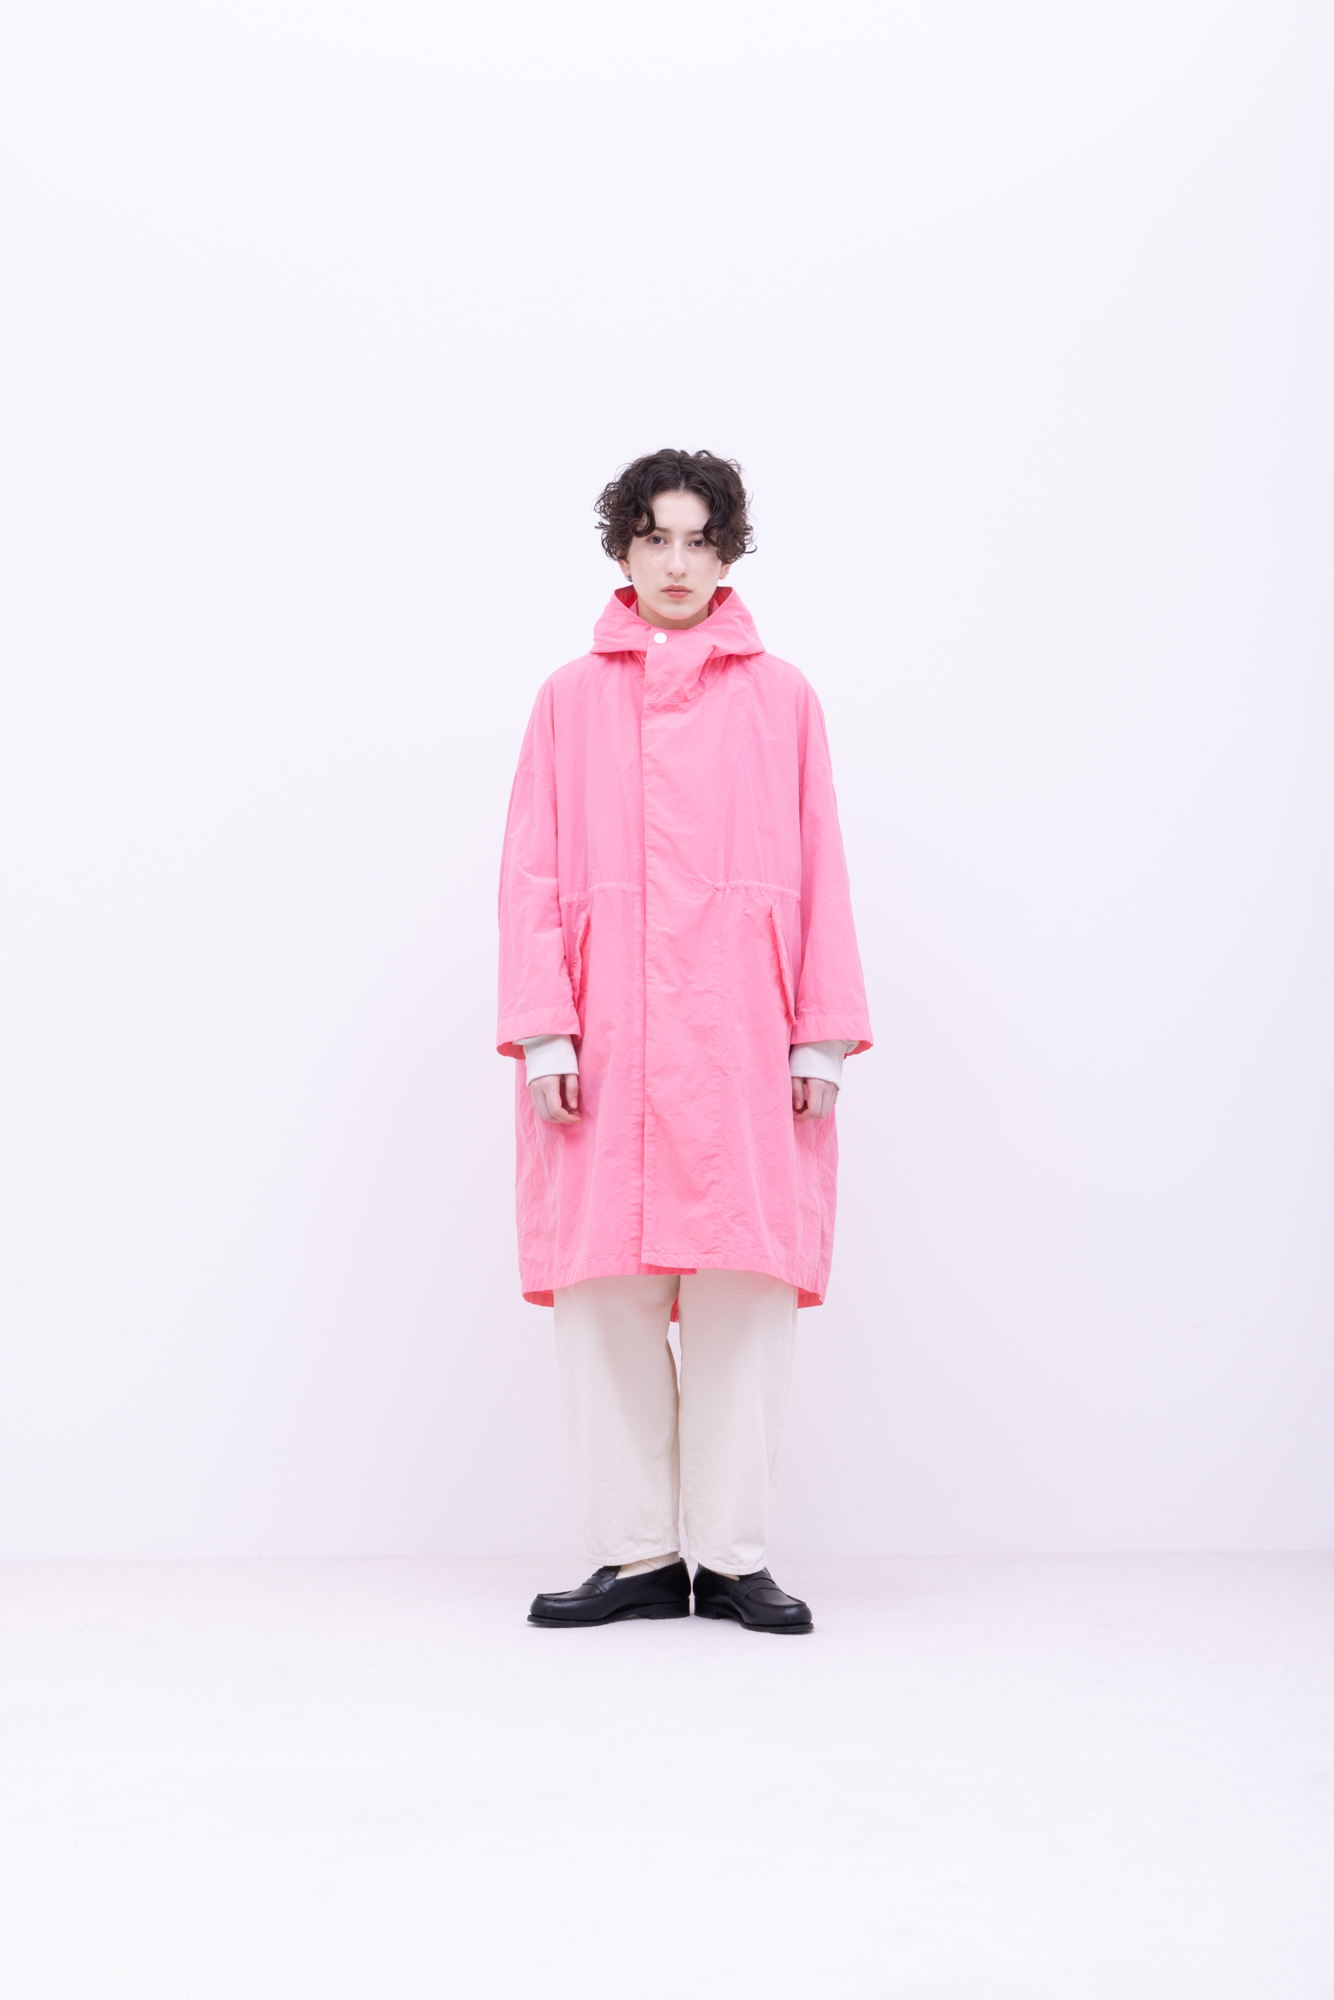 No. 034 | 2023 AW WOMENS / Model H=169cm | LOOK | FIRMUM